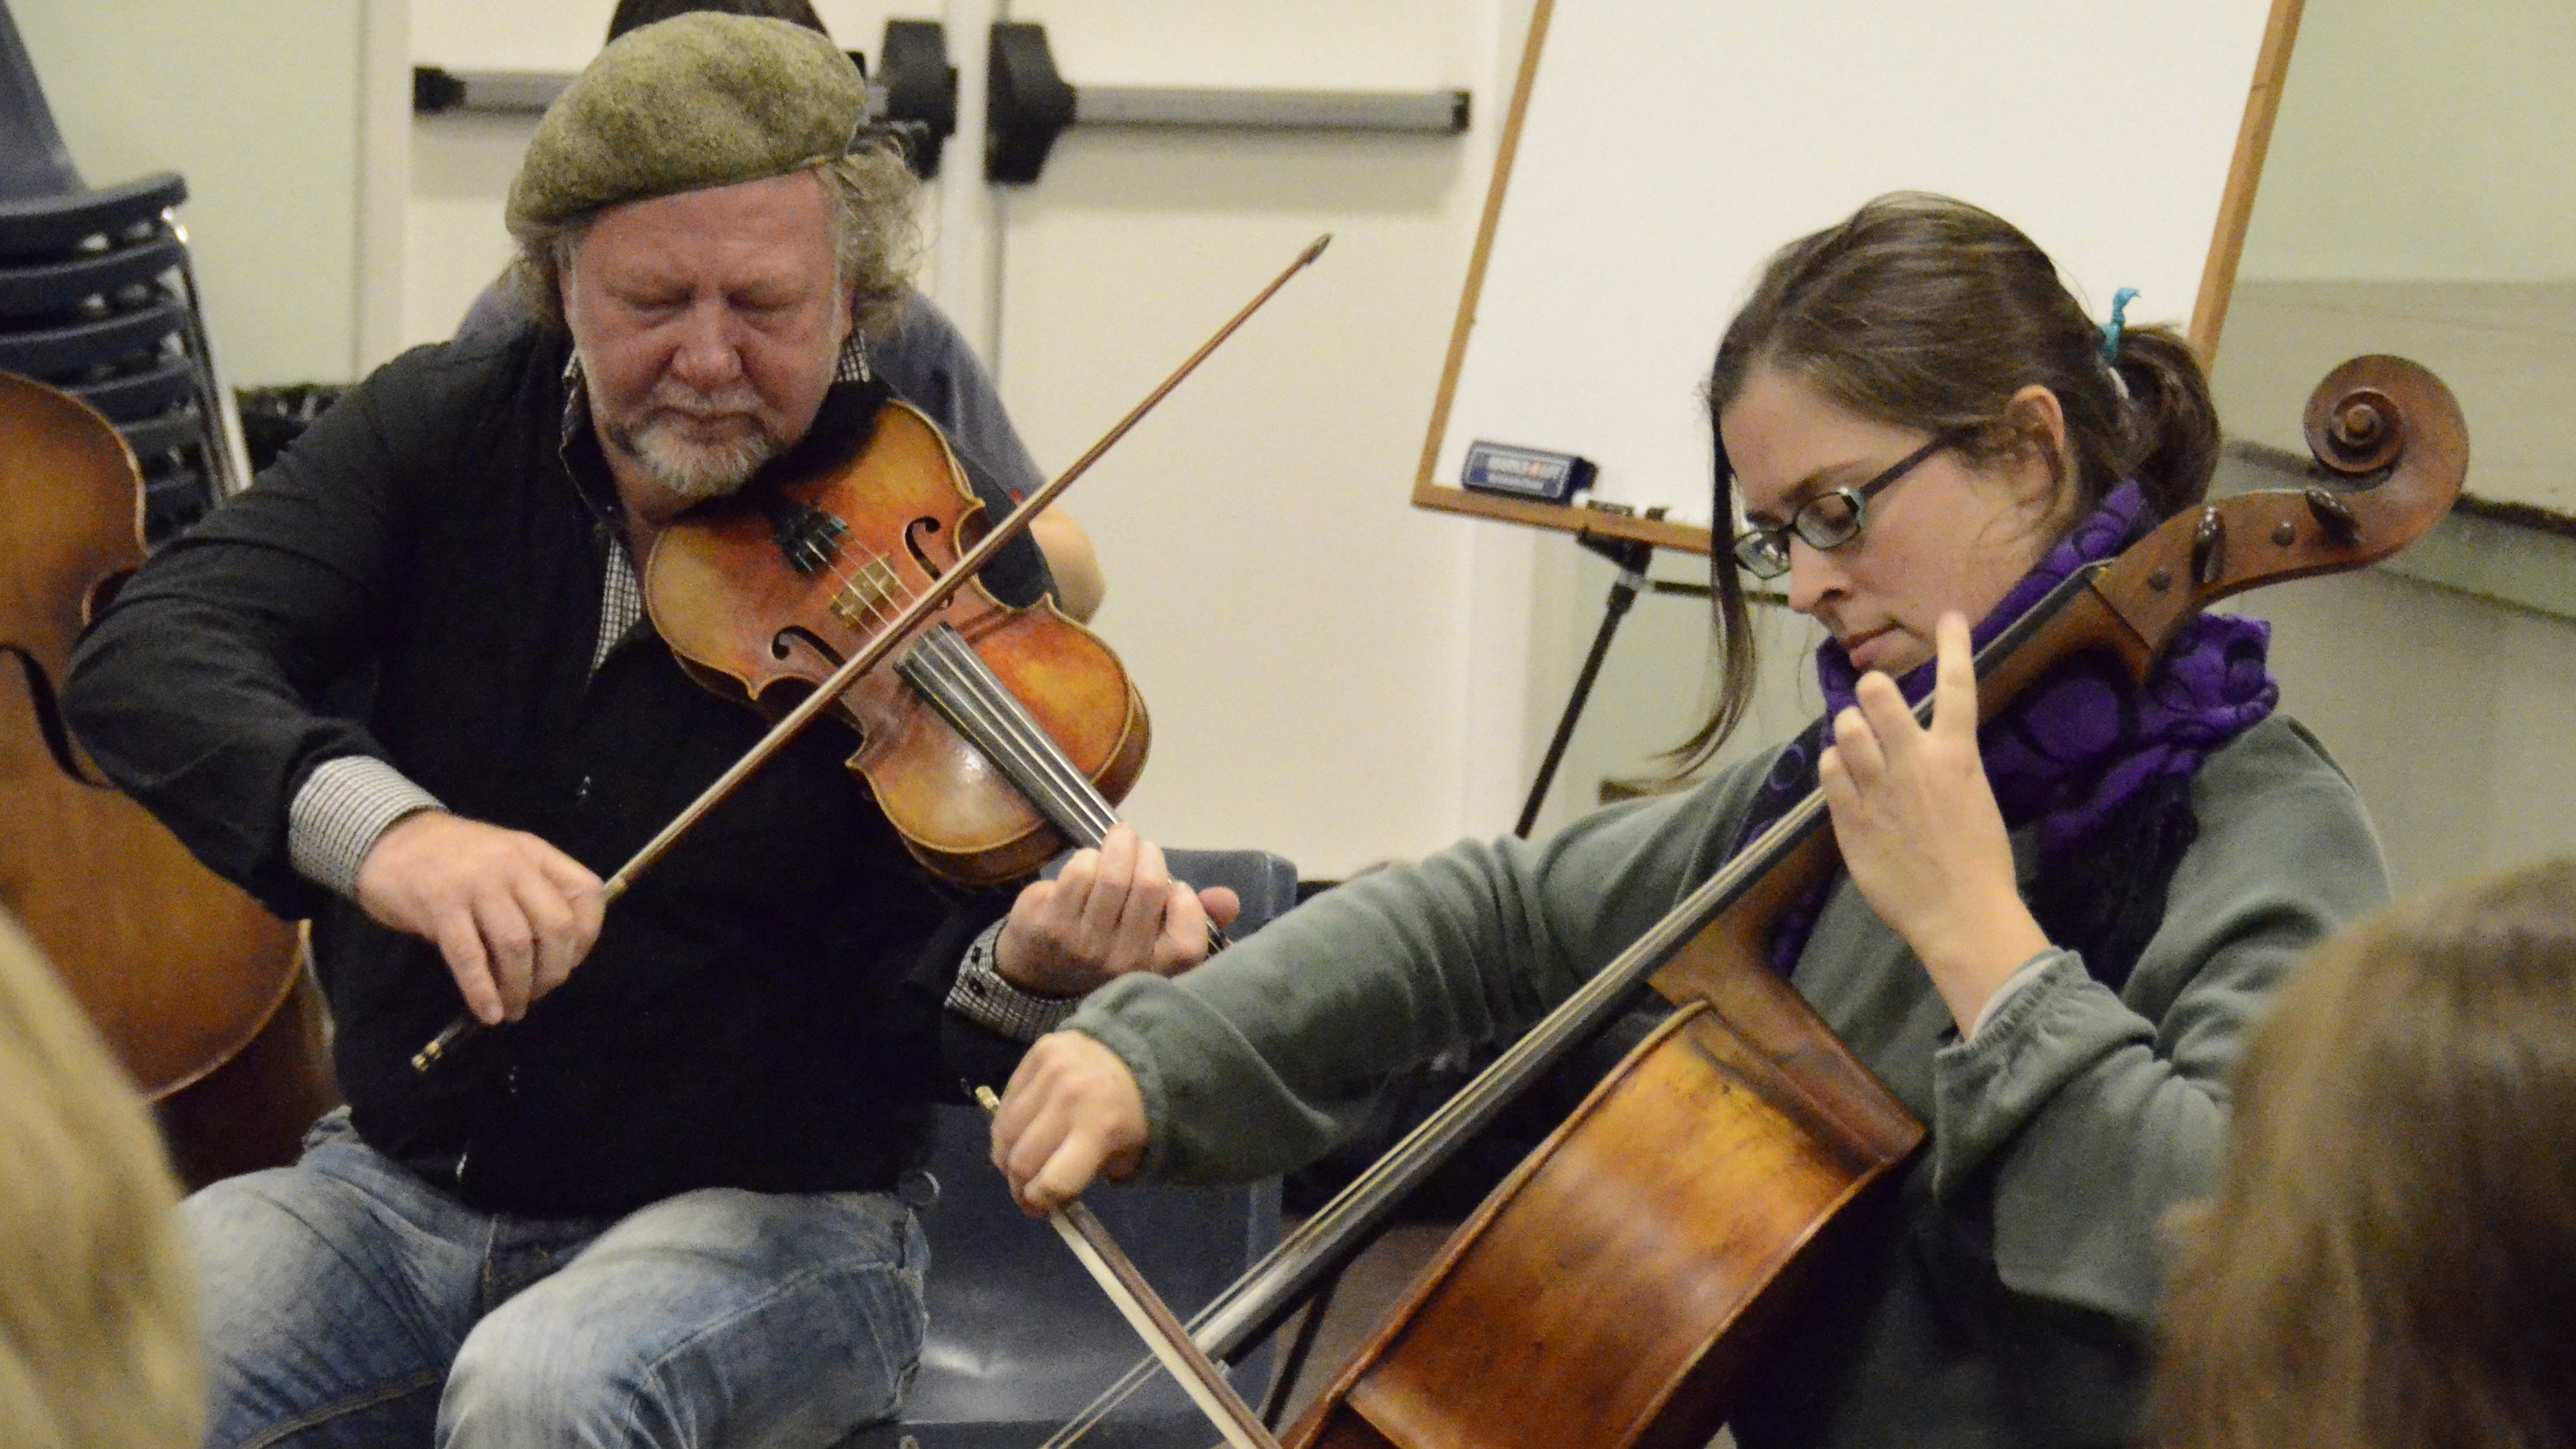 Instructors Alasdair Fraser and Natalie Haas demonstrating possibilities for a tune